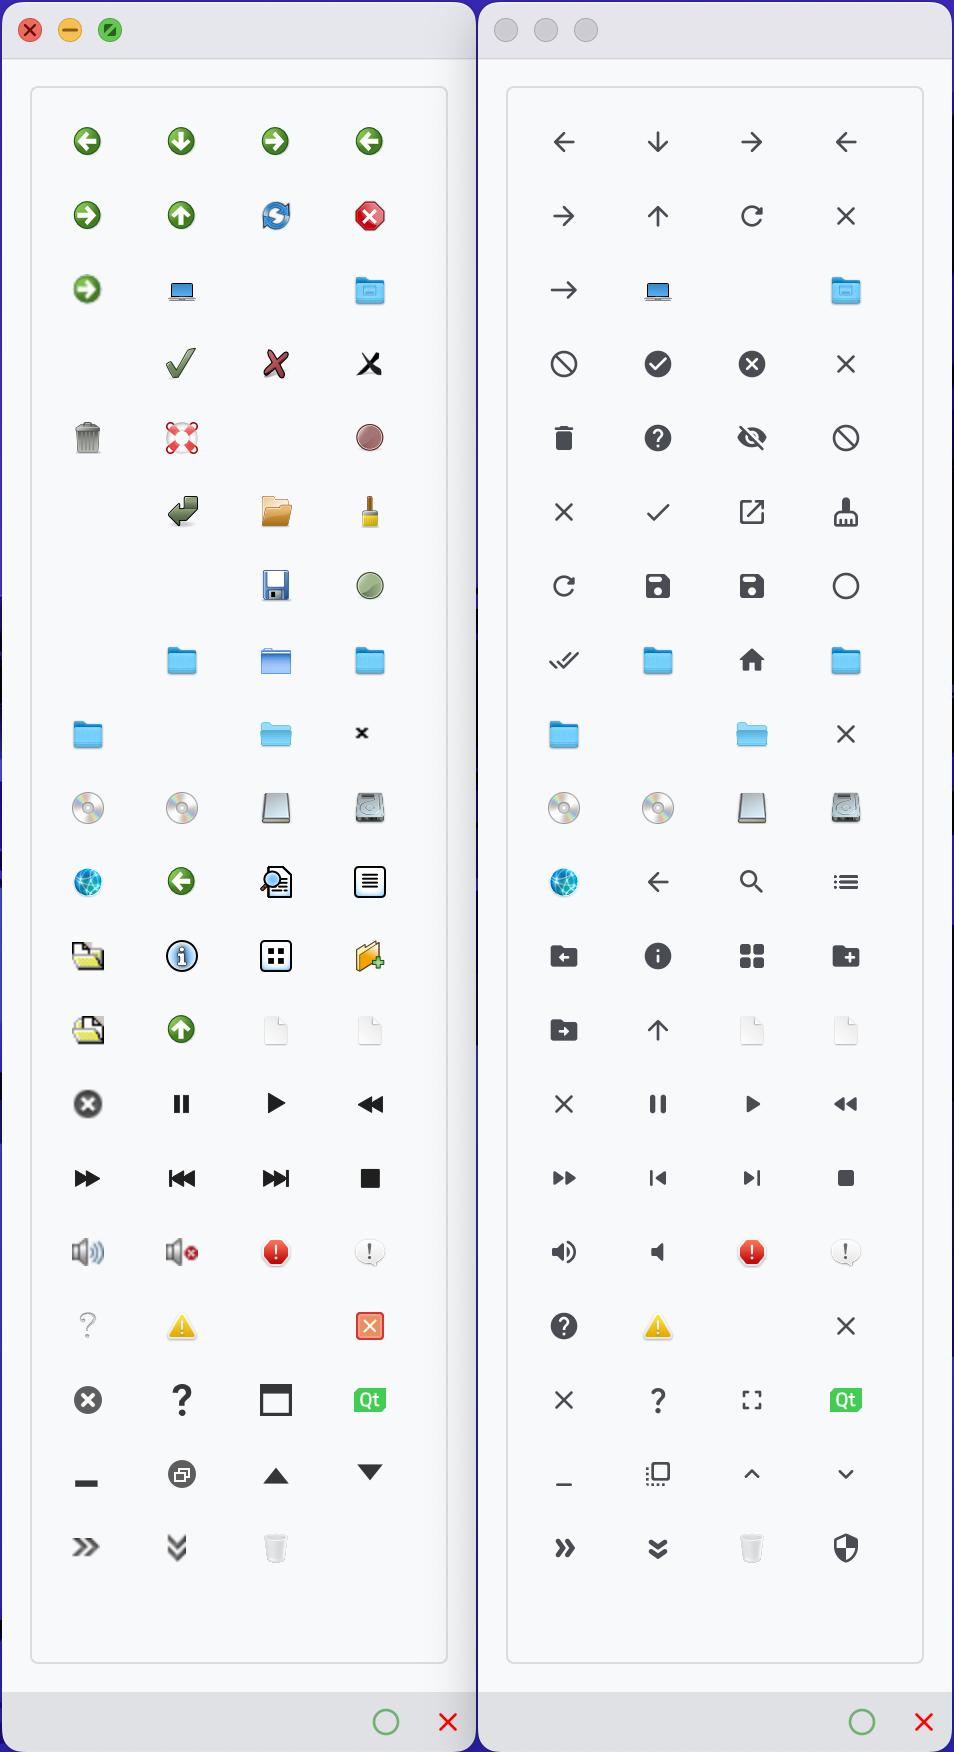 _images/standard_icons.png